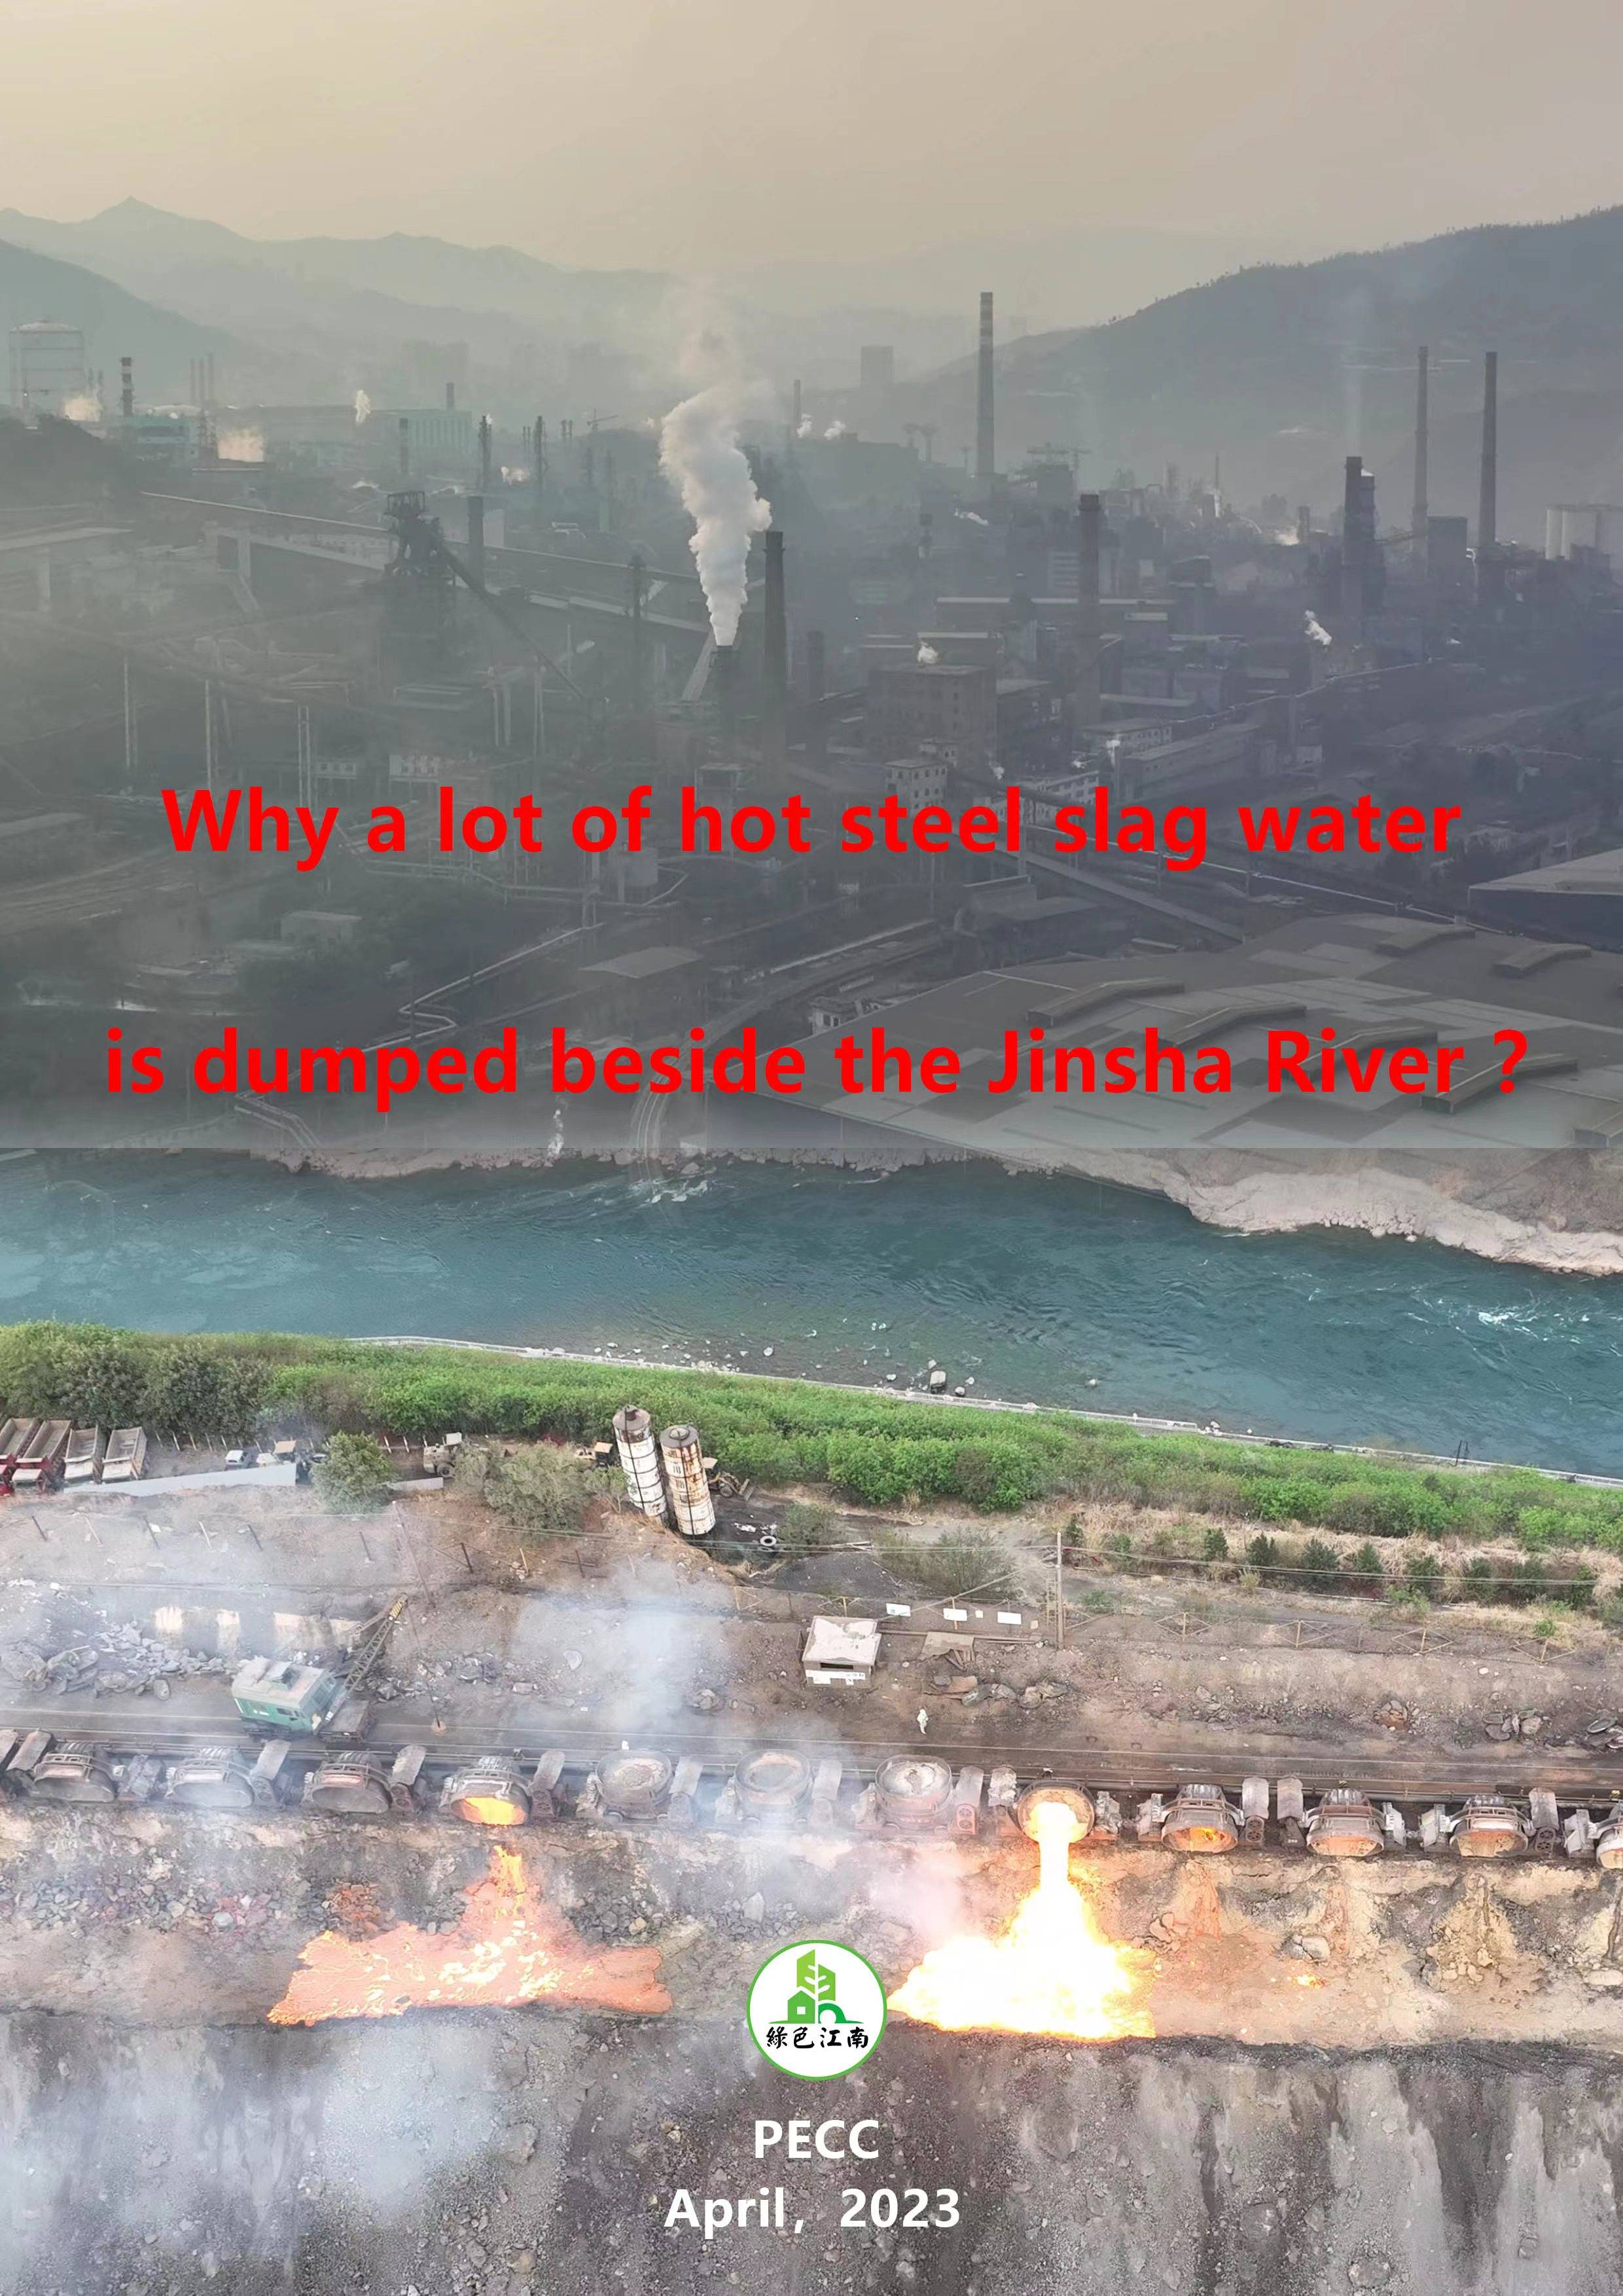 Why a lot of hot steel slag water is dumped beside the Jinsha River.